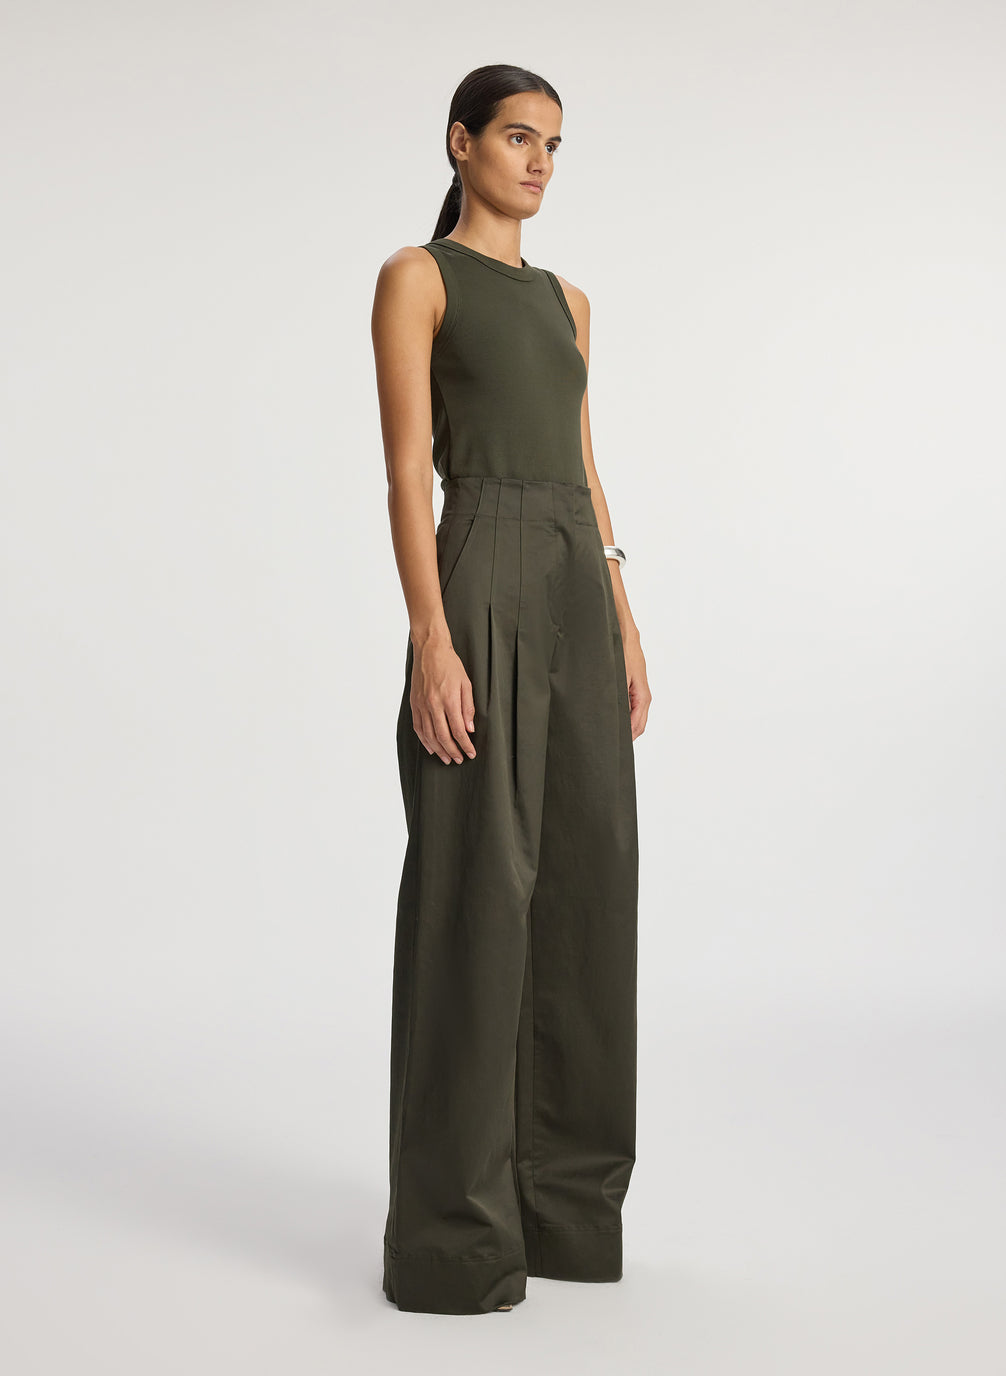 side view of woman wearing olive green tank top and olive green wide leg sateen pants